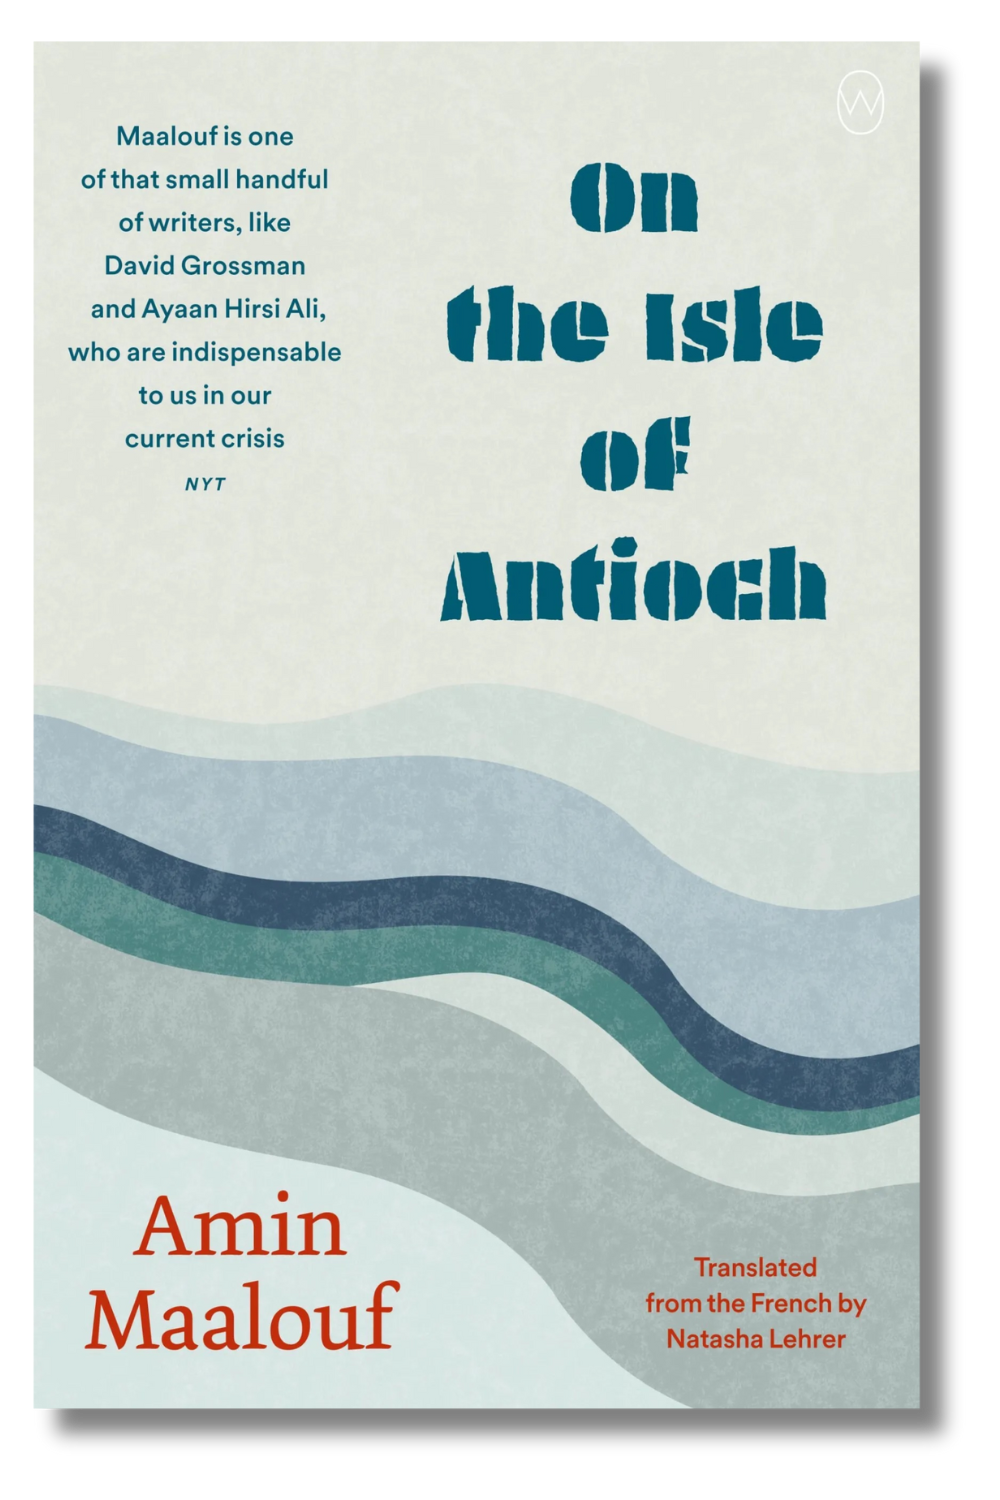 The cover of "On the Isle of Antioch" by Amin Maalouf, tr. by Natasha Lehrer